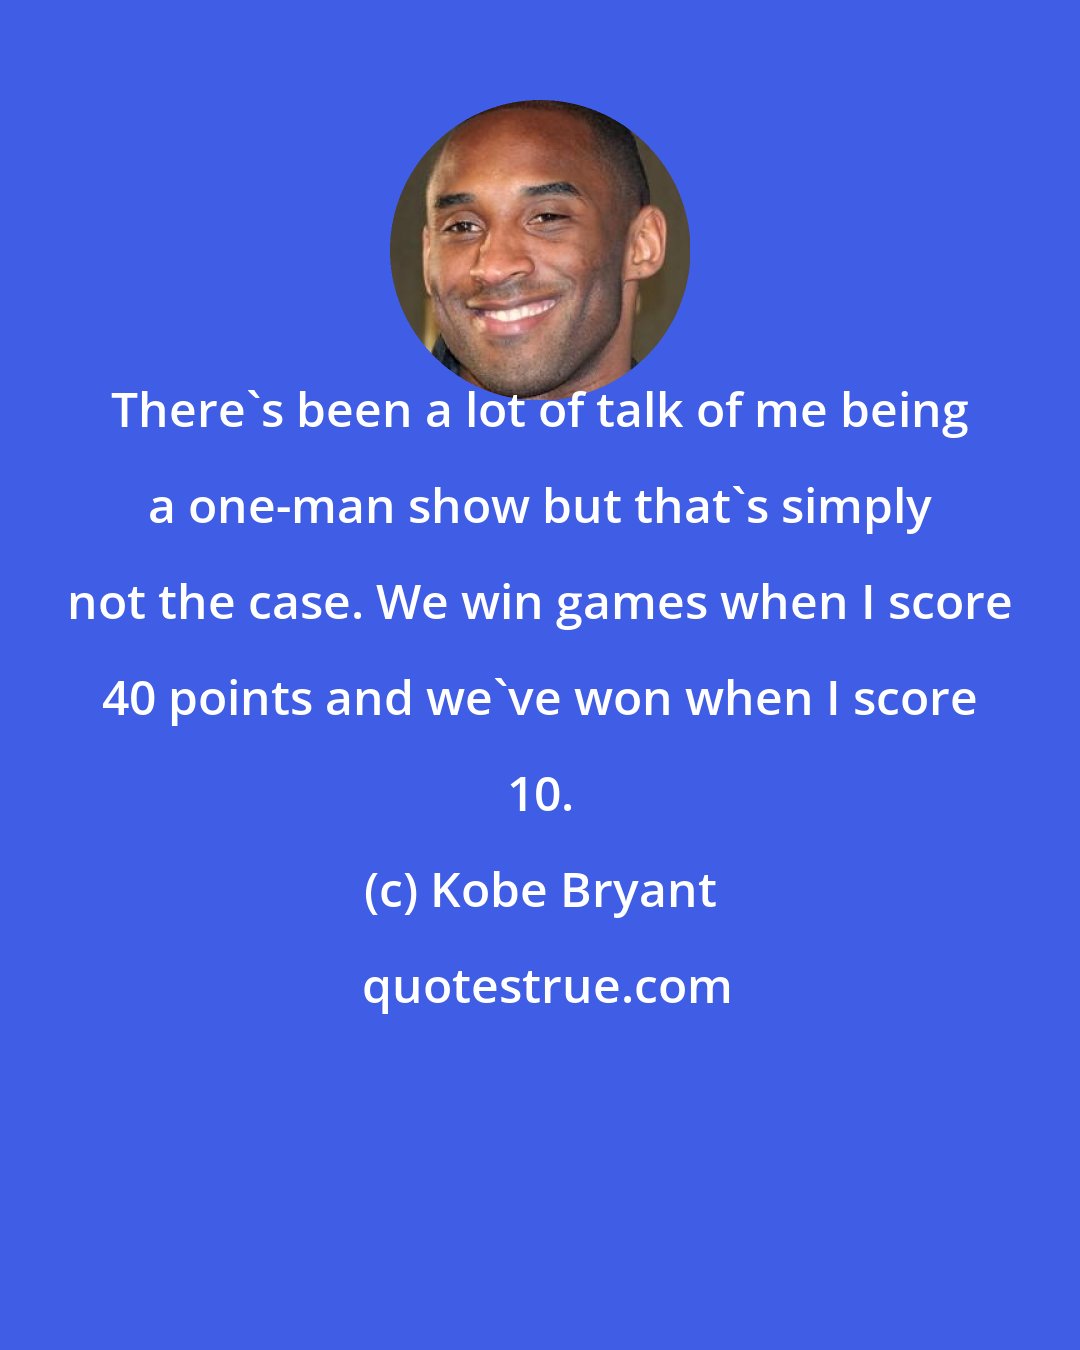 Kobe Bryant: There's been a lot of talk of me being a one-man show but that's simply not the case. We win games when I score 40 points and we've won when I score 10.